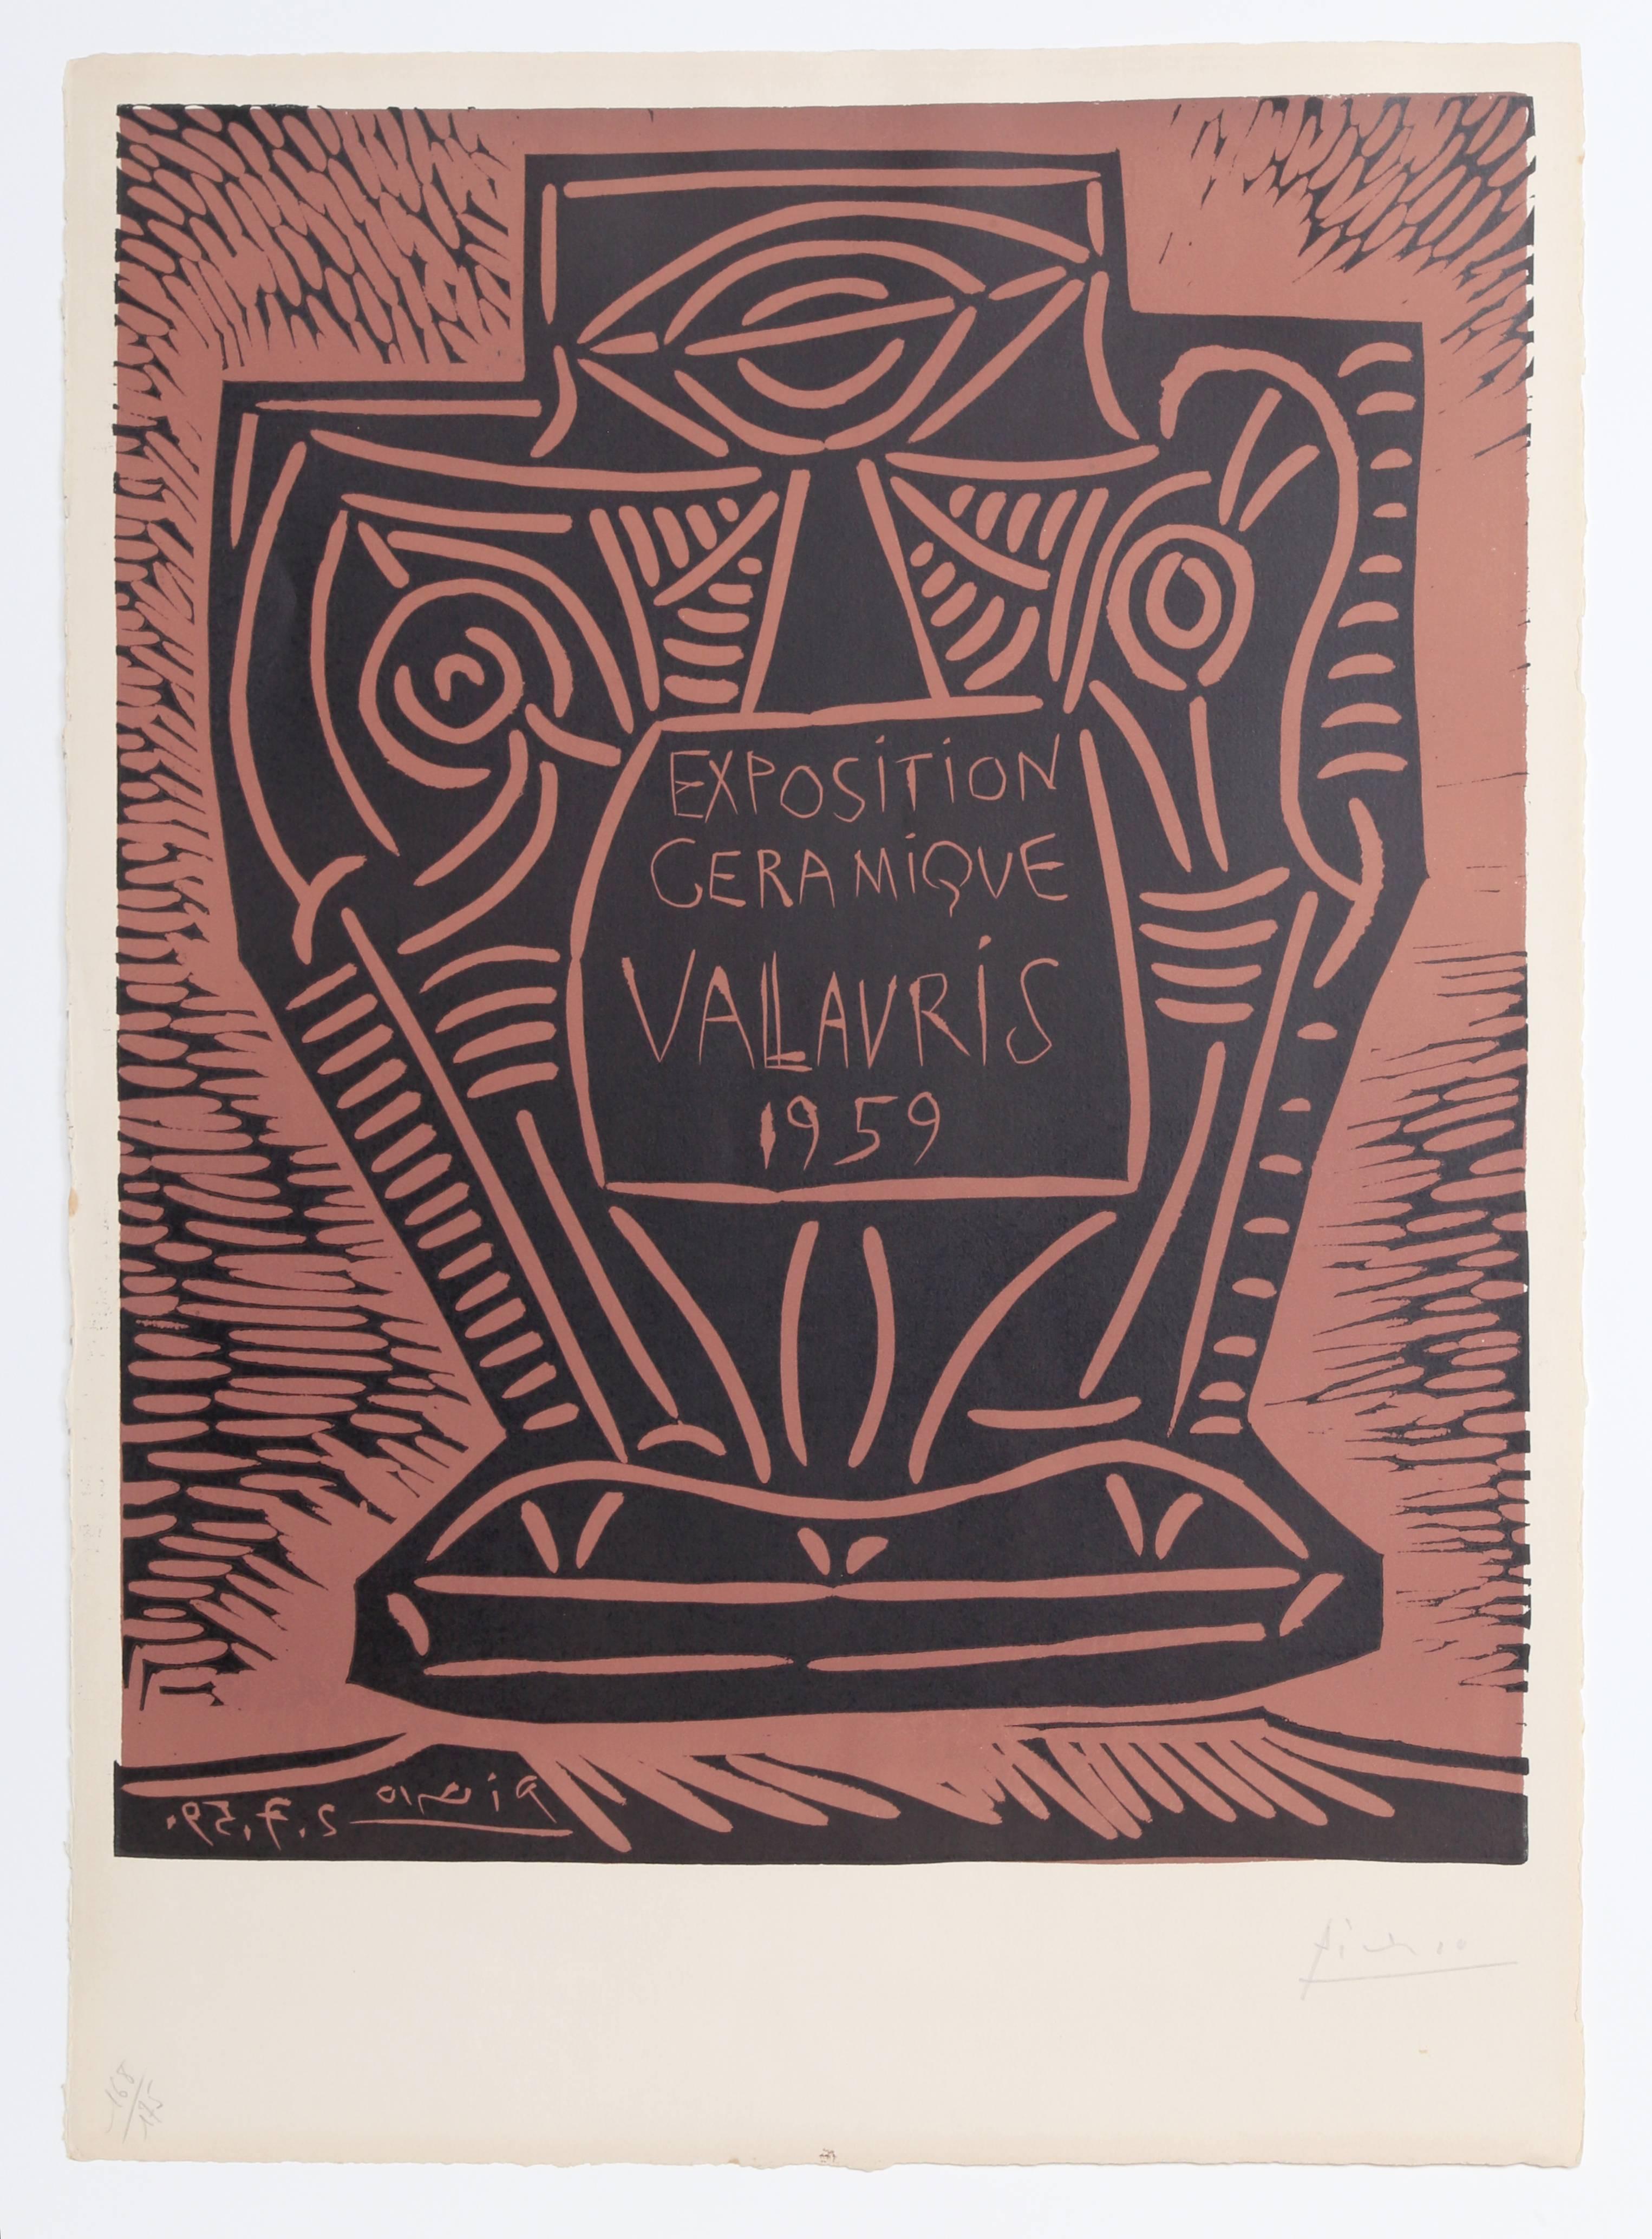 This linocut print was created in 1959 by the prolific and timeless artist, Pablo Picasso. Picasso created an enormous amount of work during his lifetime, and is the father of the Cubist movement. His vision and style still influence artists today.